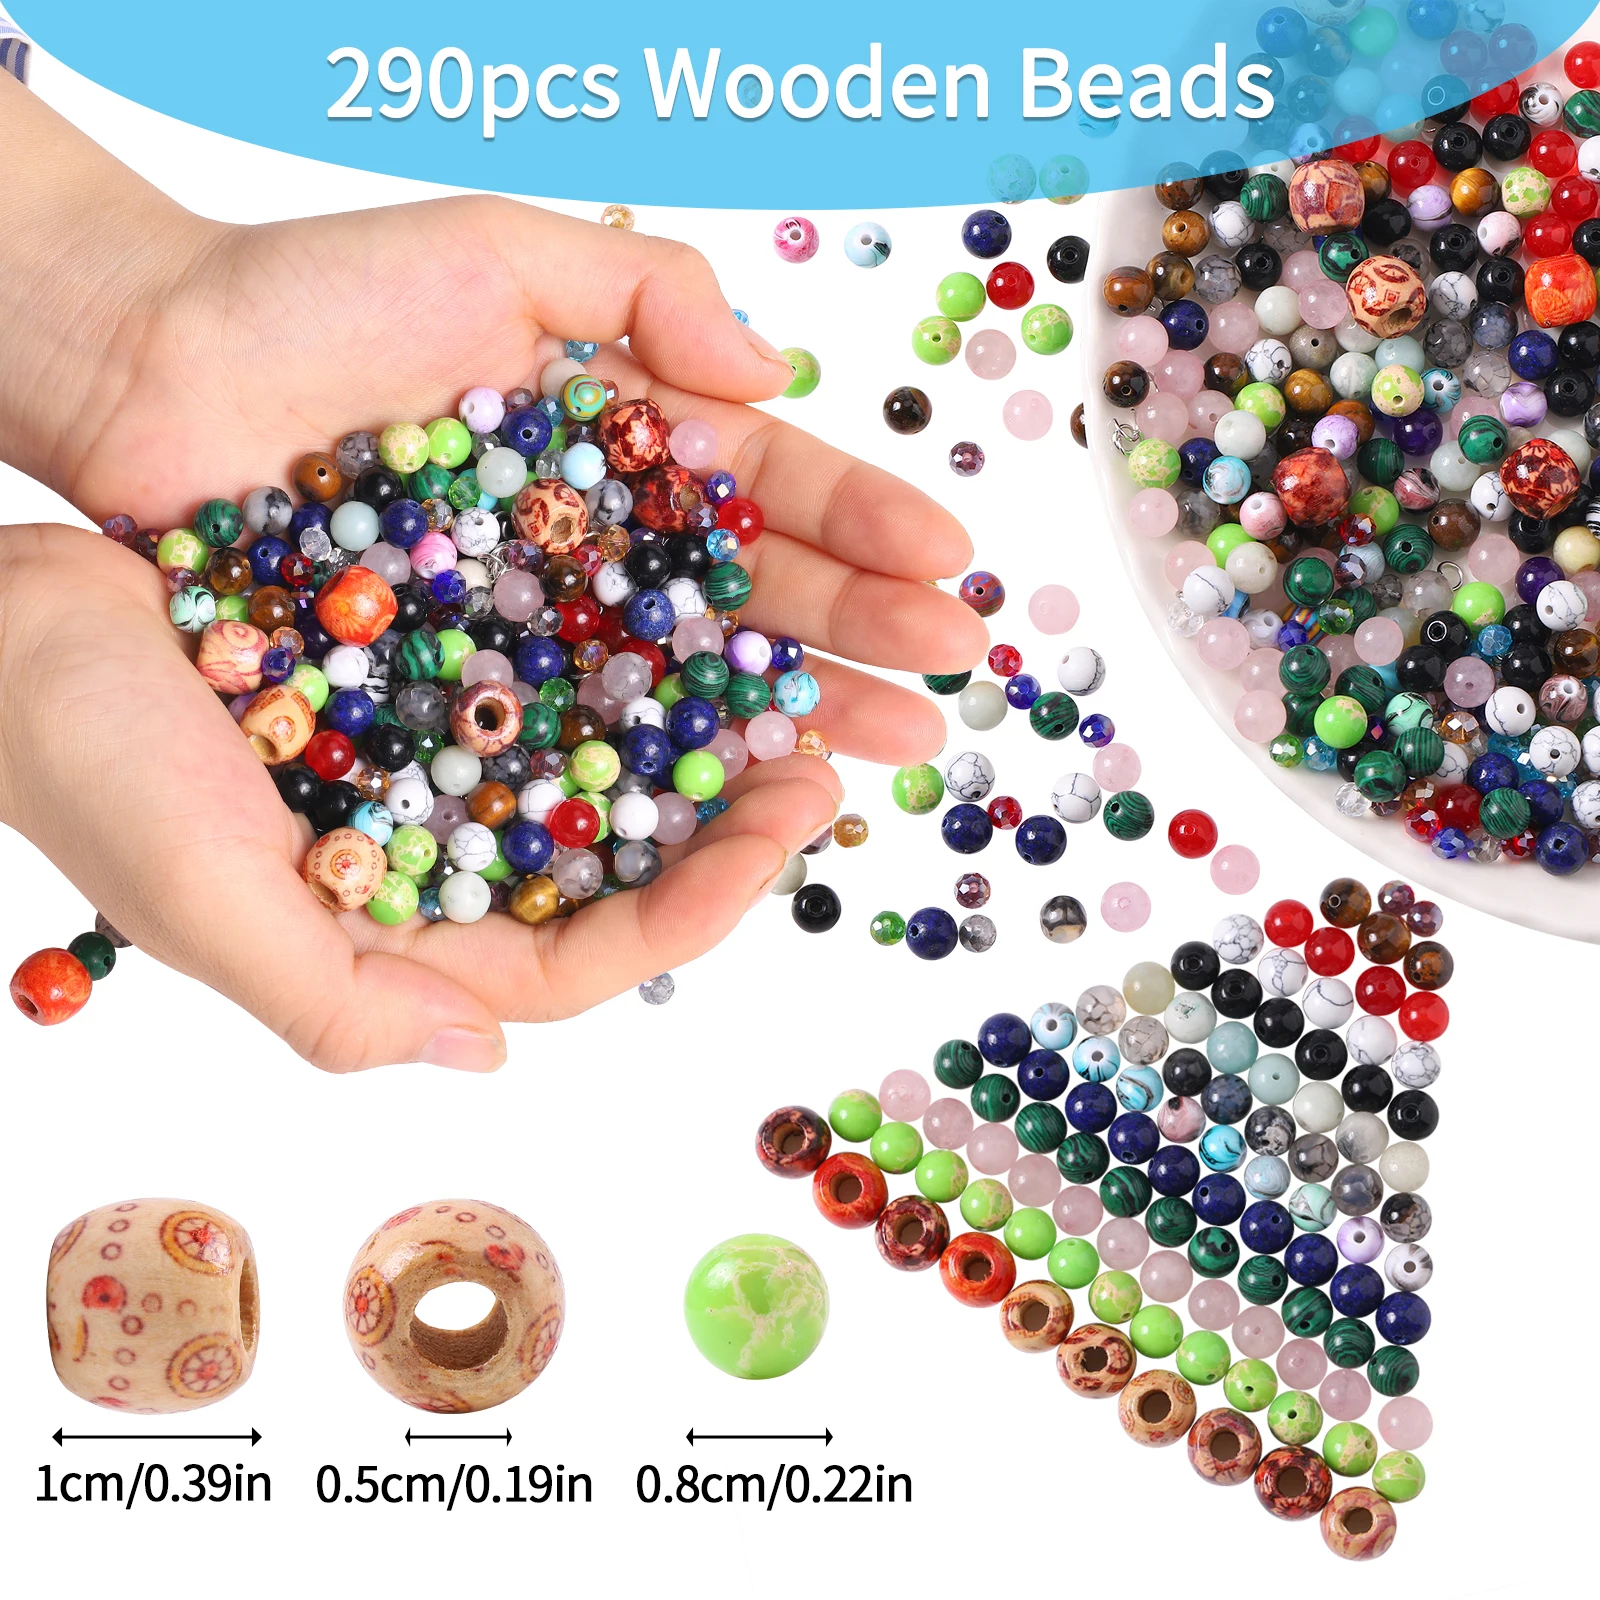 290pcs Wood Handmade DIY Mixed Alphabet Letter Beads send tools Charms Beads for Making Jewelry Handmade Bracelets Accessories solid wood jewelry display cabinet stand necklace pendant bracelet display stand storage jewelry box and display stand